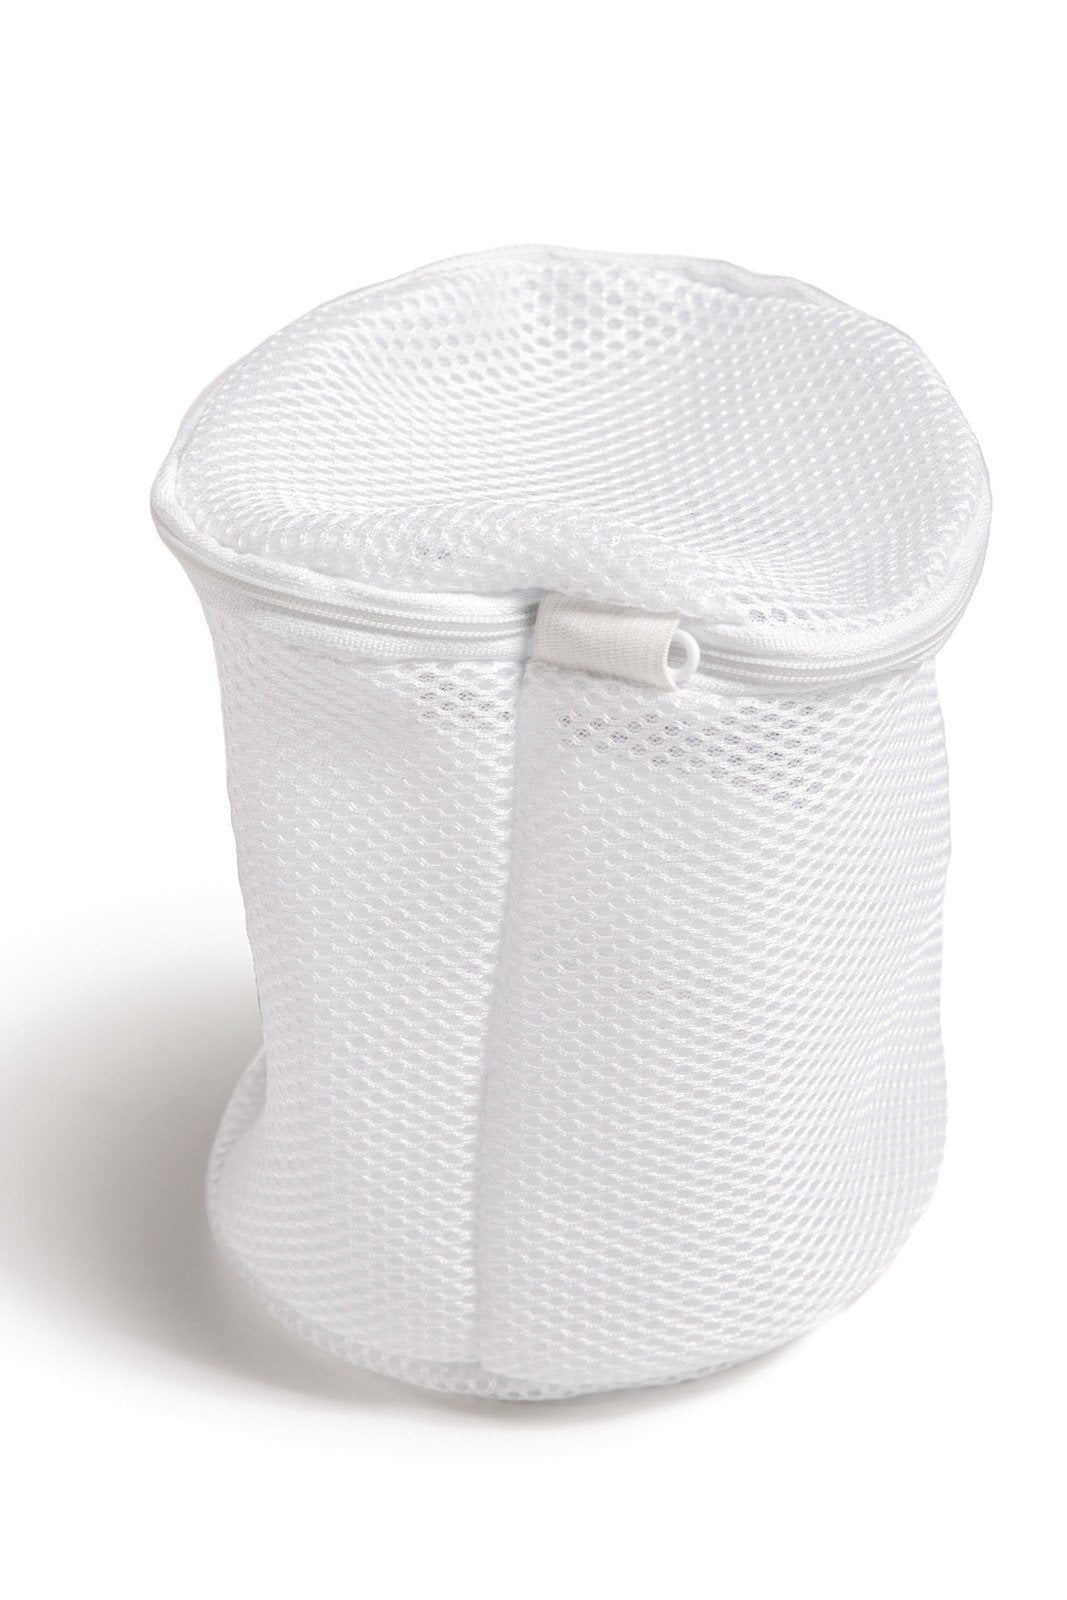 Mesh Wash Bag with Zipper - Bra Sized Home>Laundry>Wash Bag Fishers Finery 